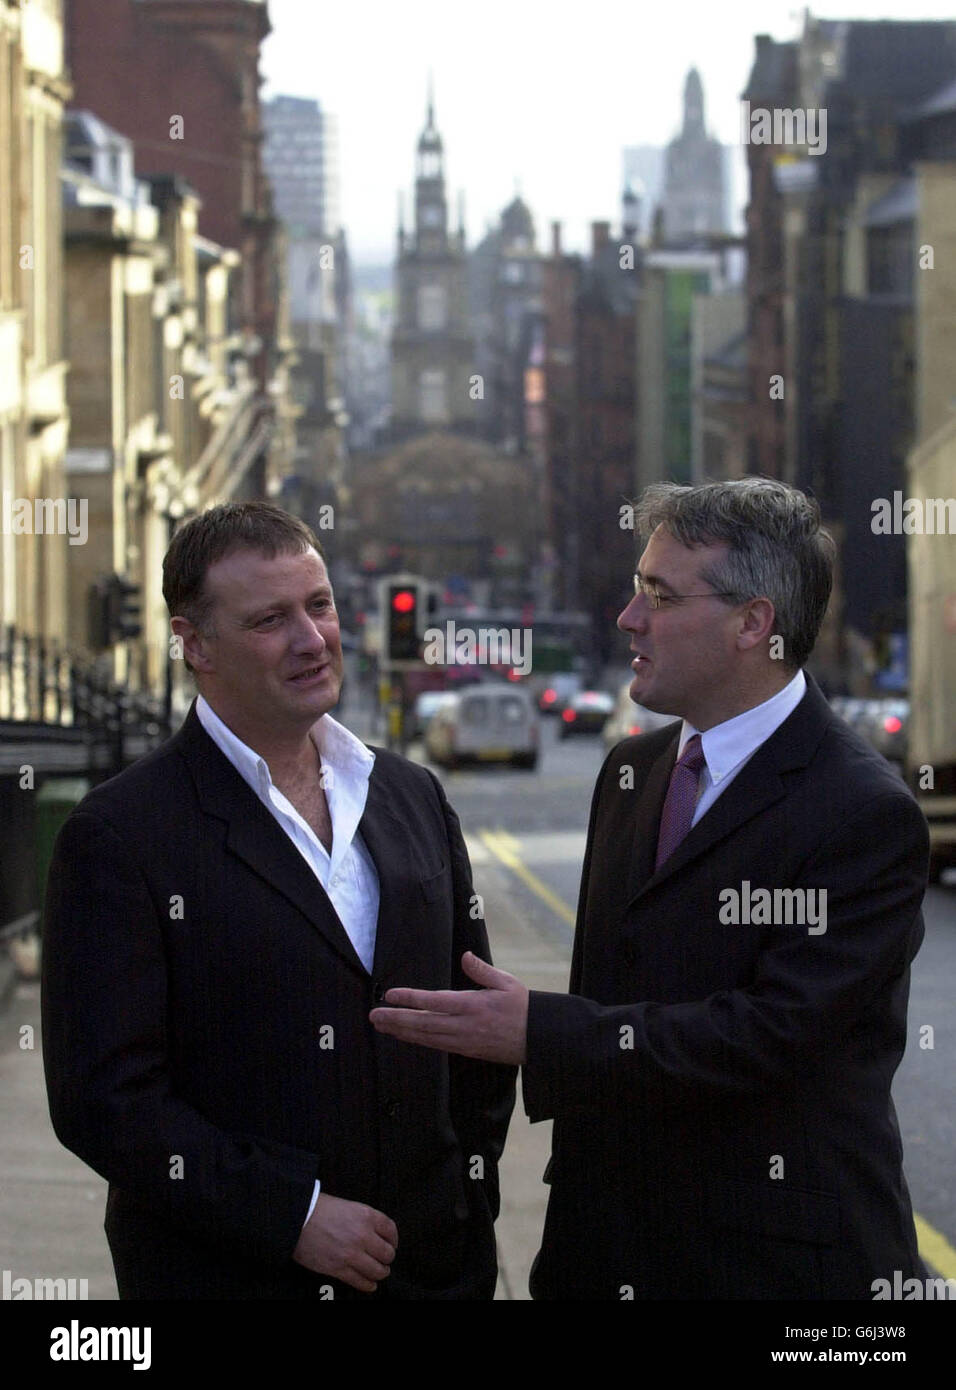 Peter McAleese and Frank McAveety discuss the announcment outside the Scottish Screen headquarters in Glasgow that a Thirty Two Million dollar Hollywood movie is set to be shot in Scotland.The film entitled 'The Jacket' will be produced by George Clooney and Steven Soderbergh's Section Eight production comapny. The announcment was made by Frank McAveety Msp, Minister for Culture, along with UK producer of the film Peter McAleese . Stock Photo